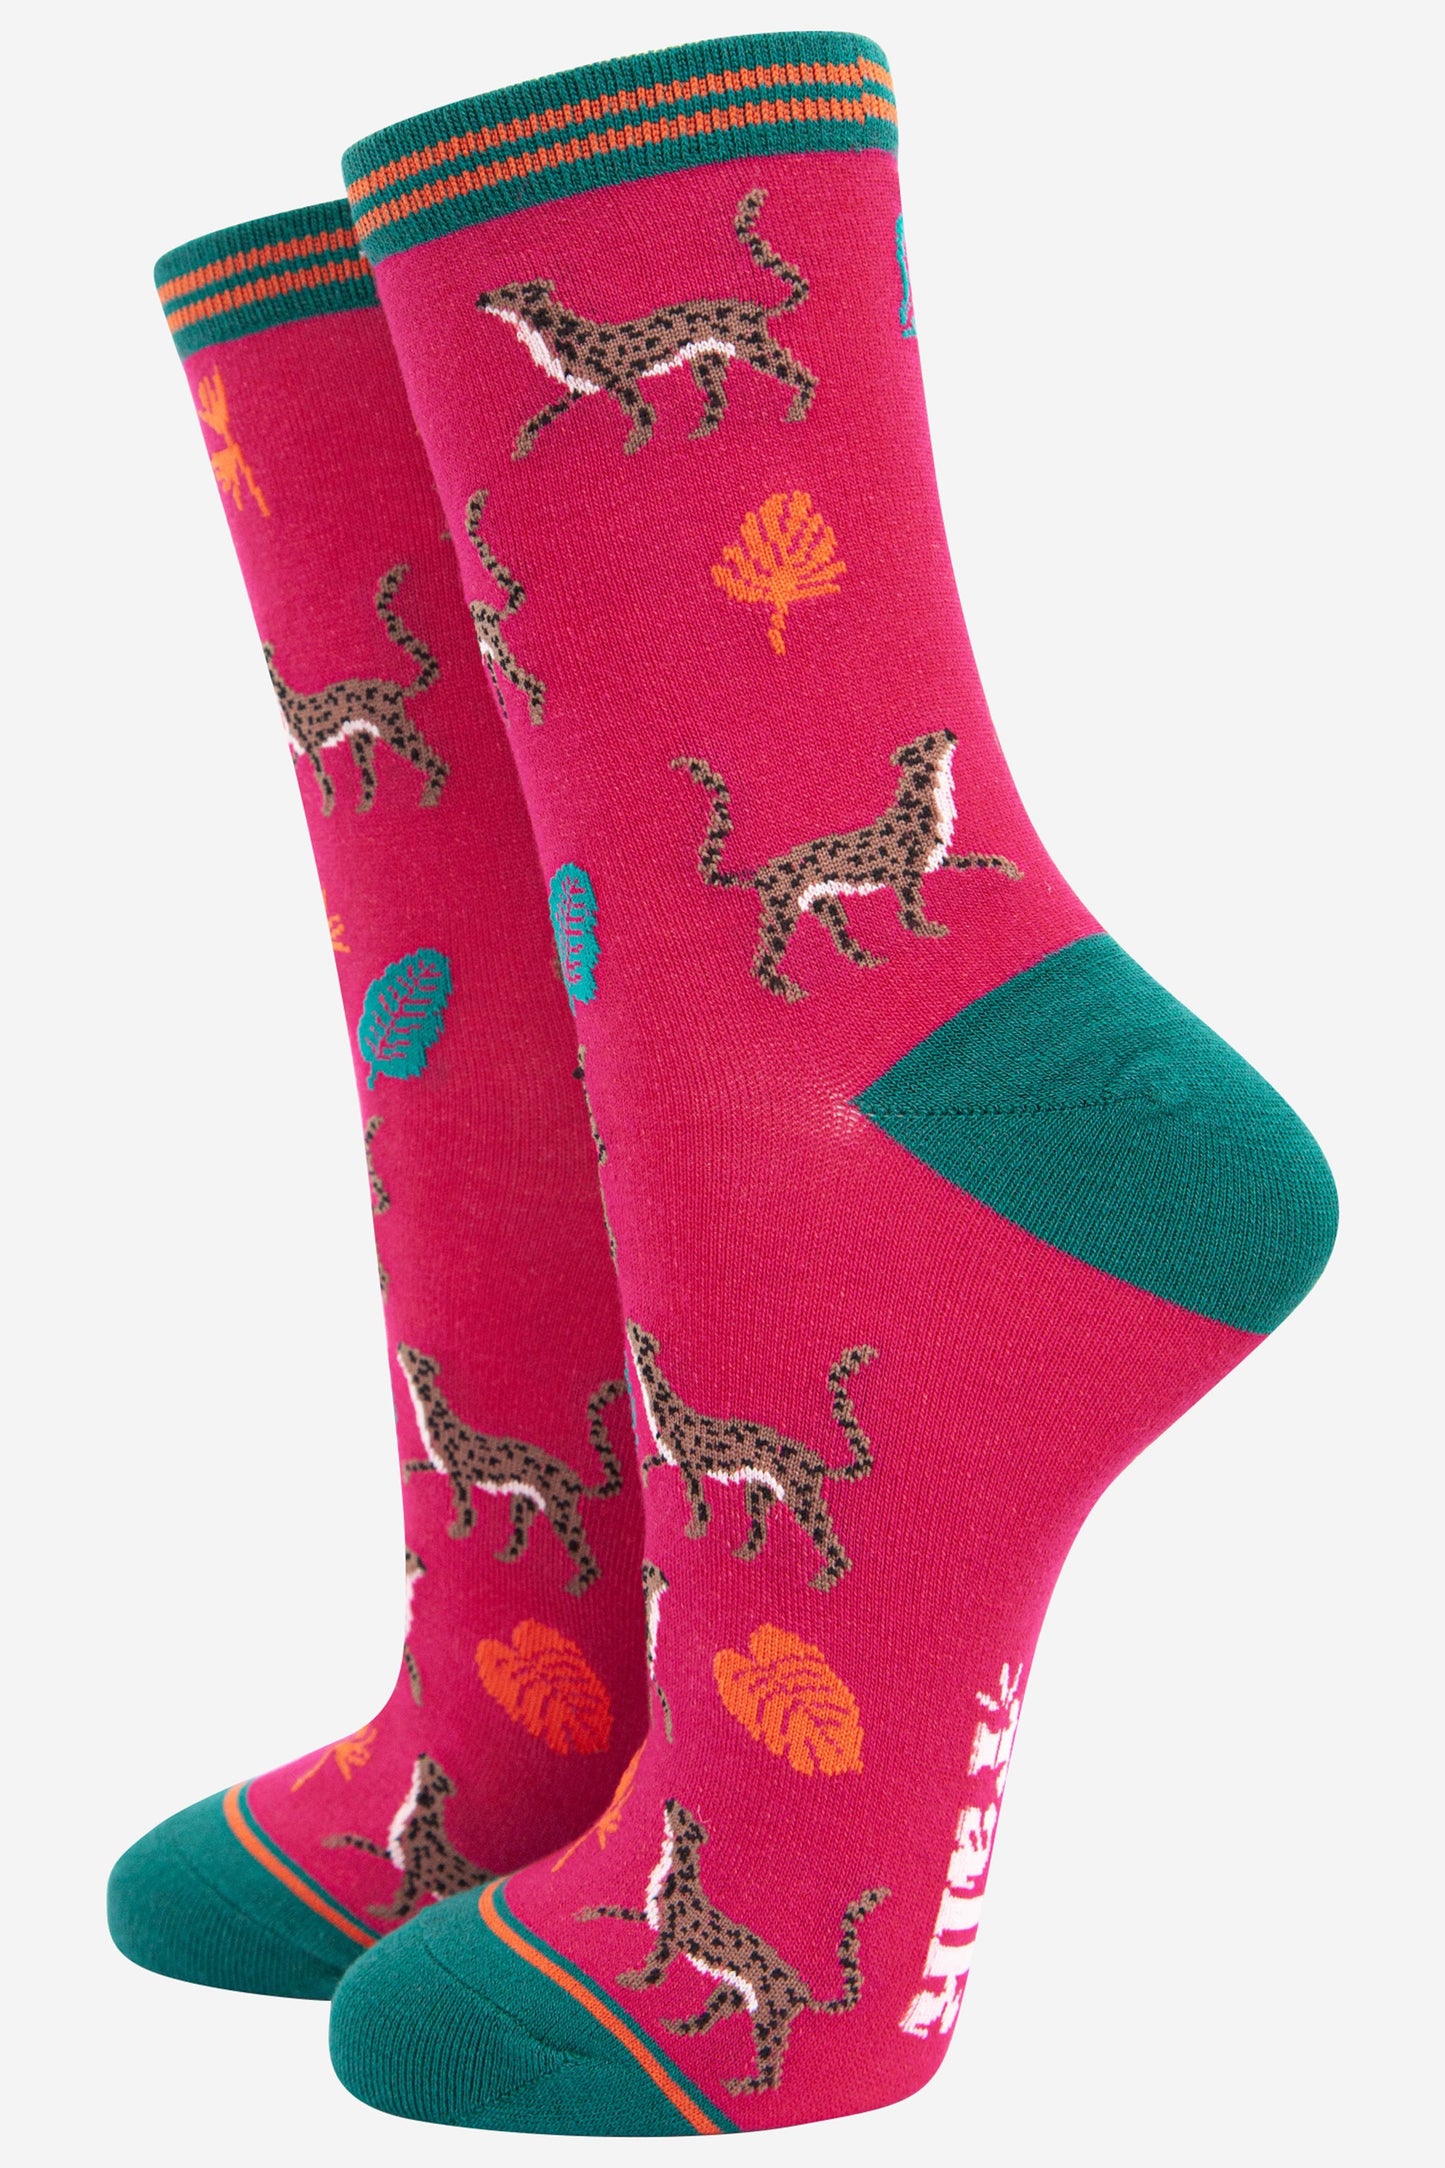 fuchsia pink bamboo socks with a green heel, toe and cuff featuring an pattern of cheetah cats and colourful jungle leaves